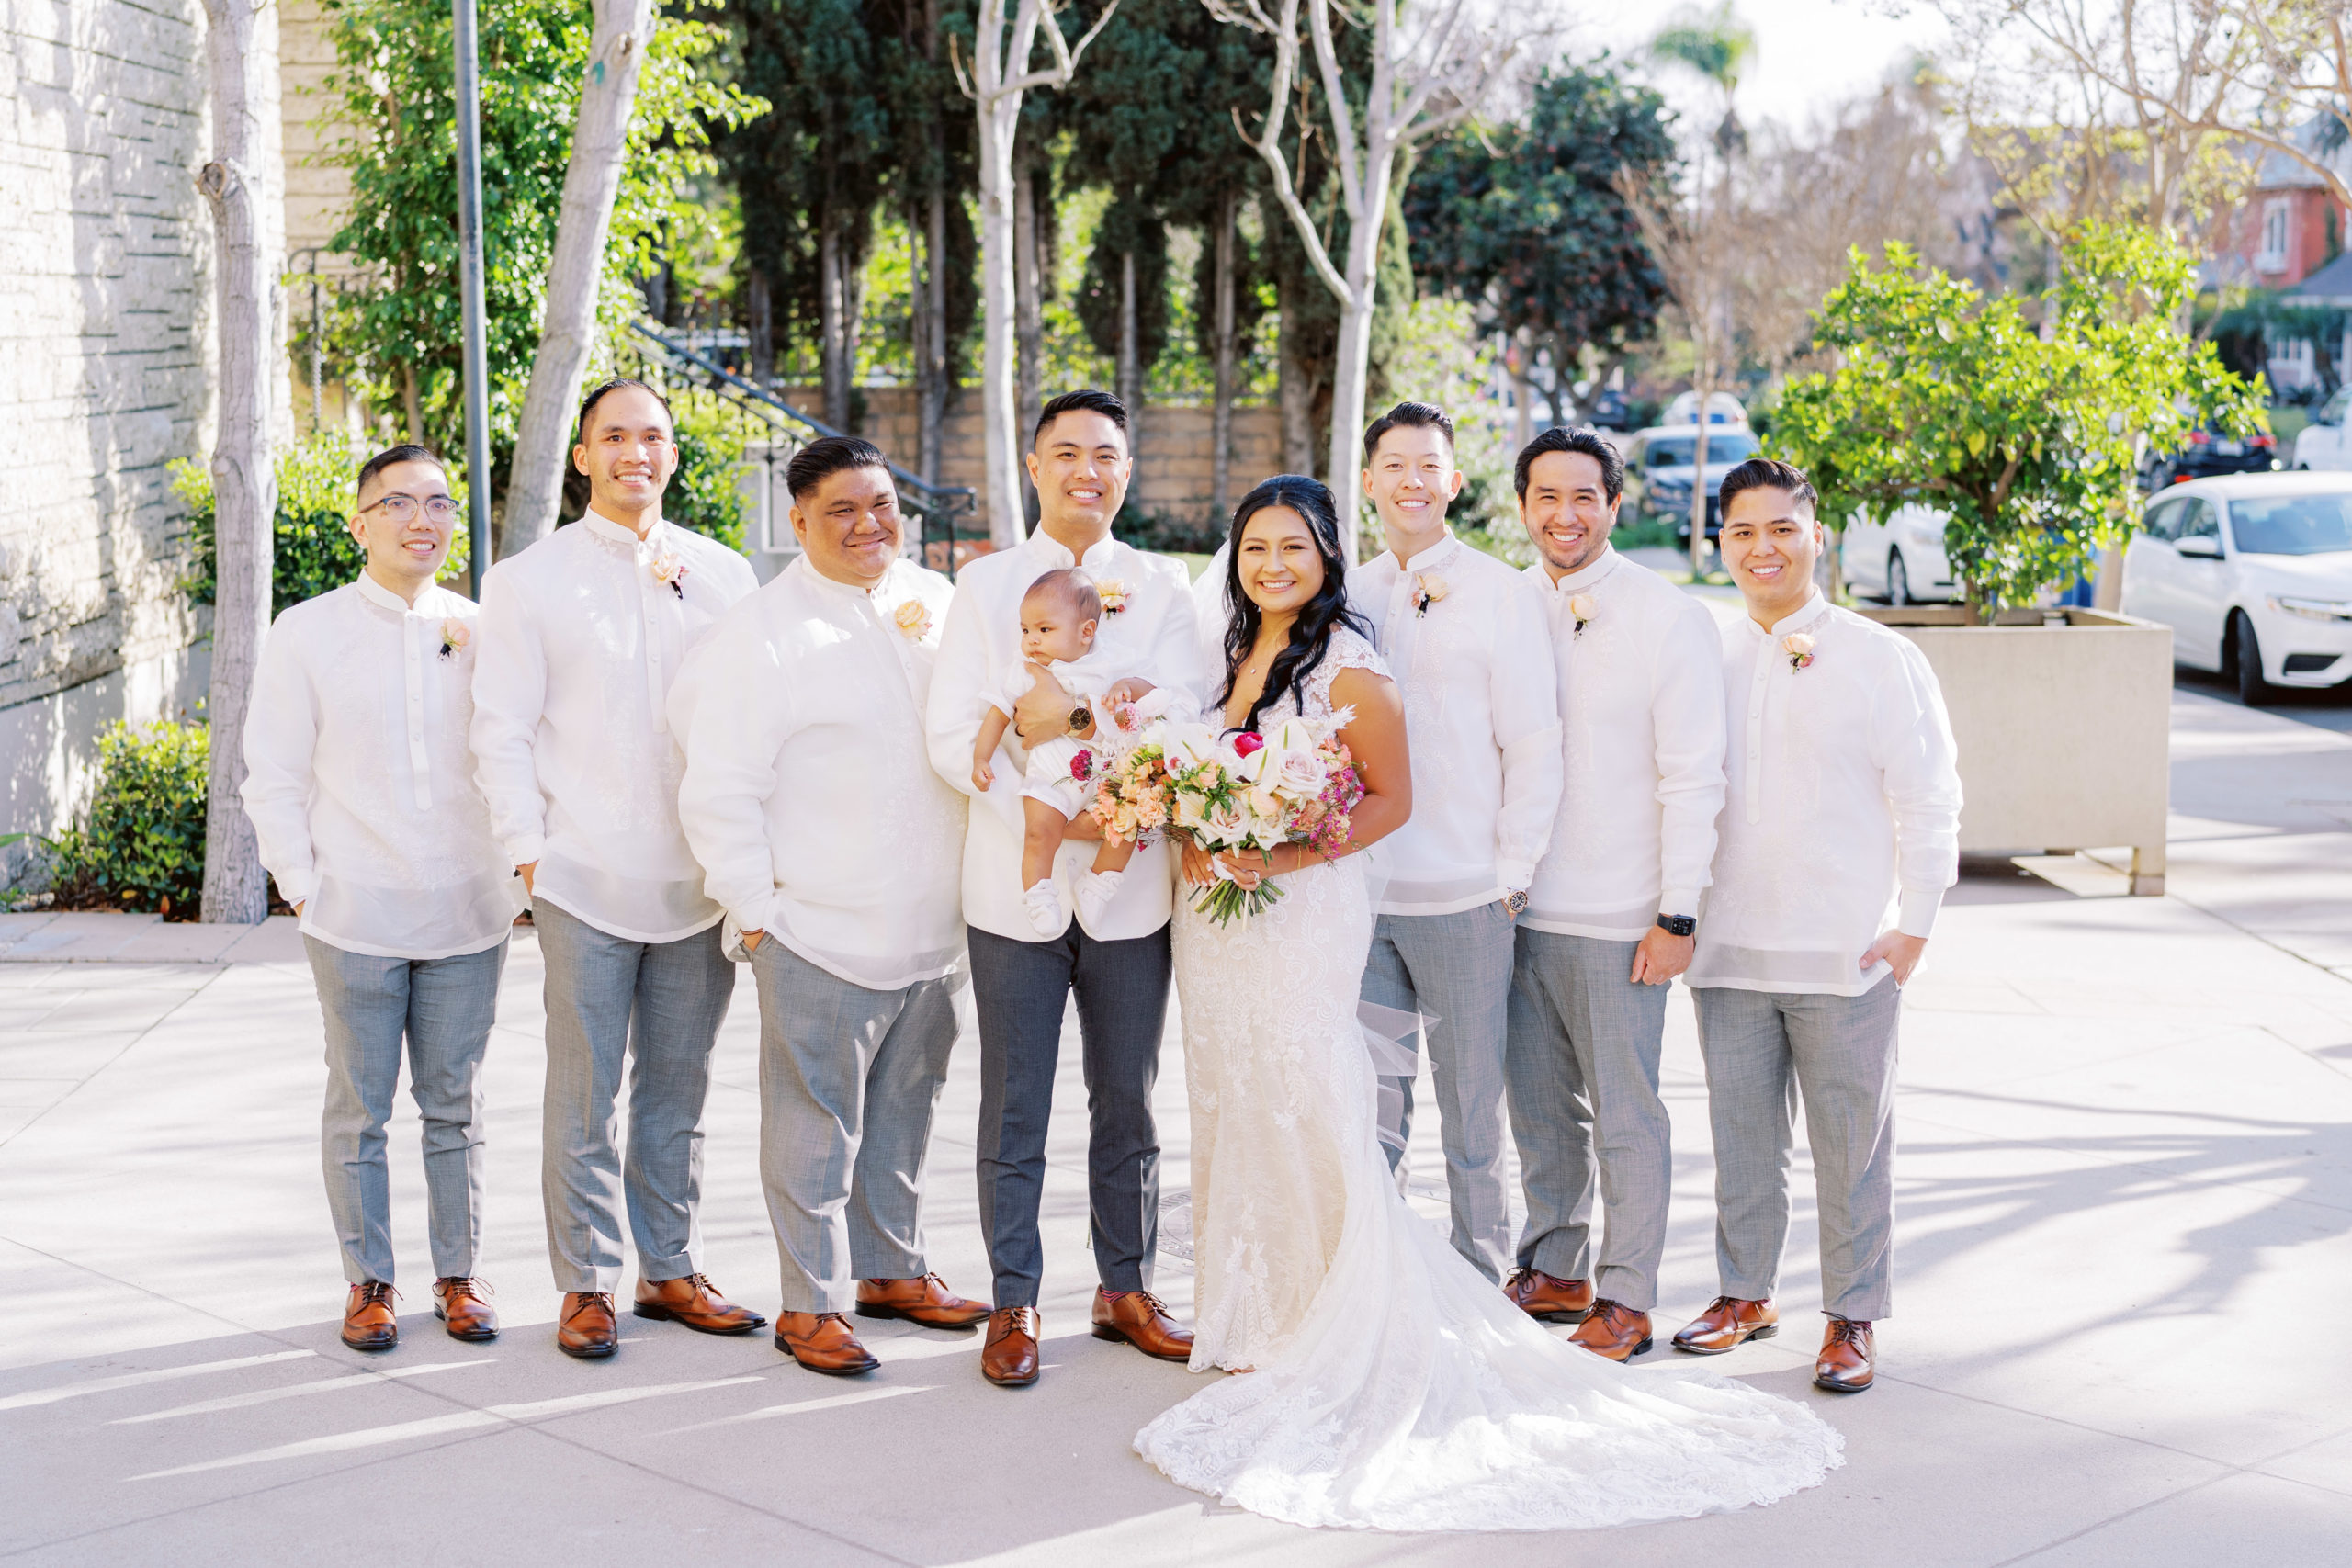 bride and groom stand with groomsmen in white traditional wedding attire